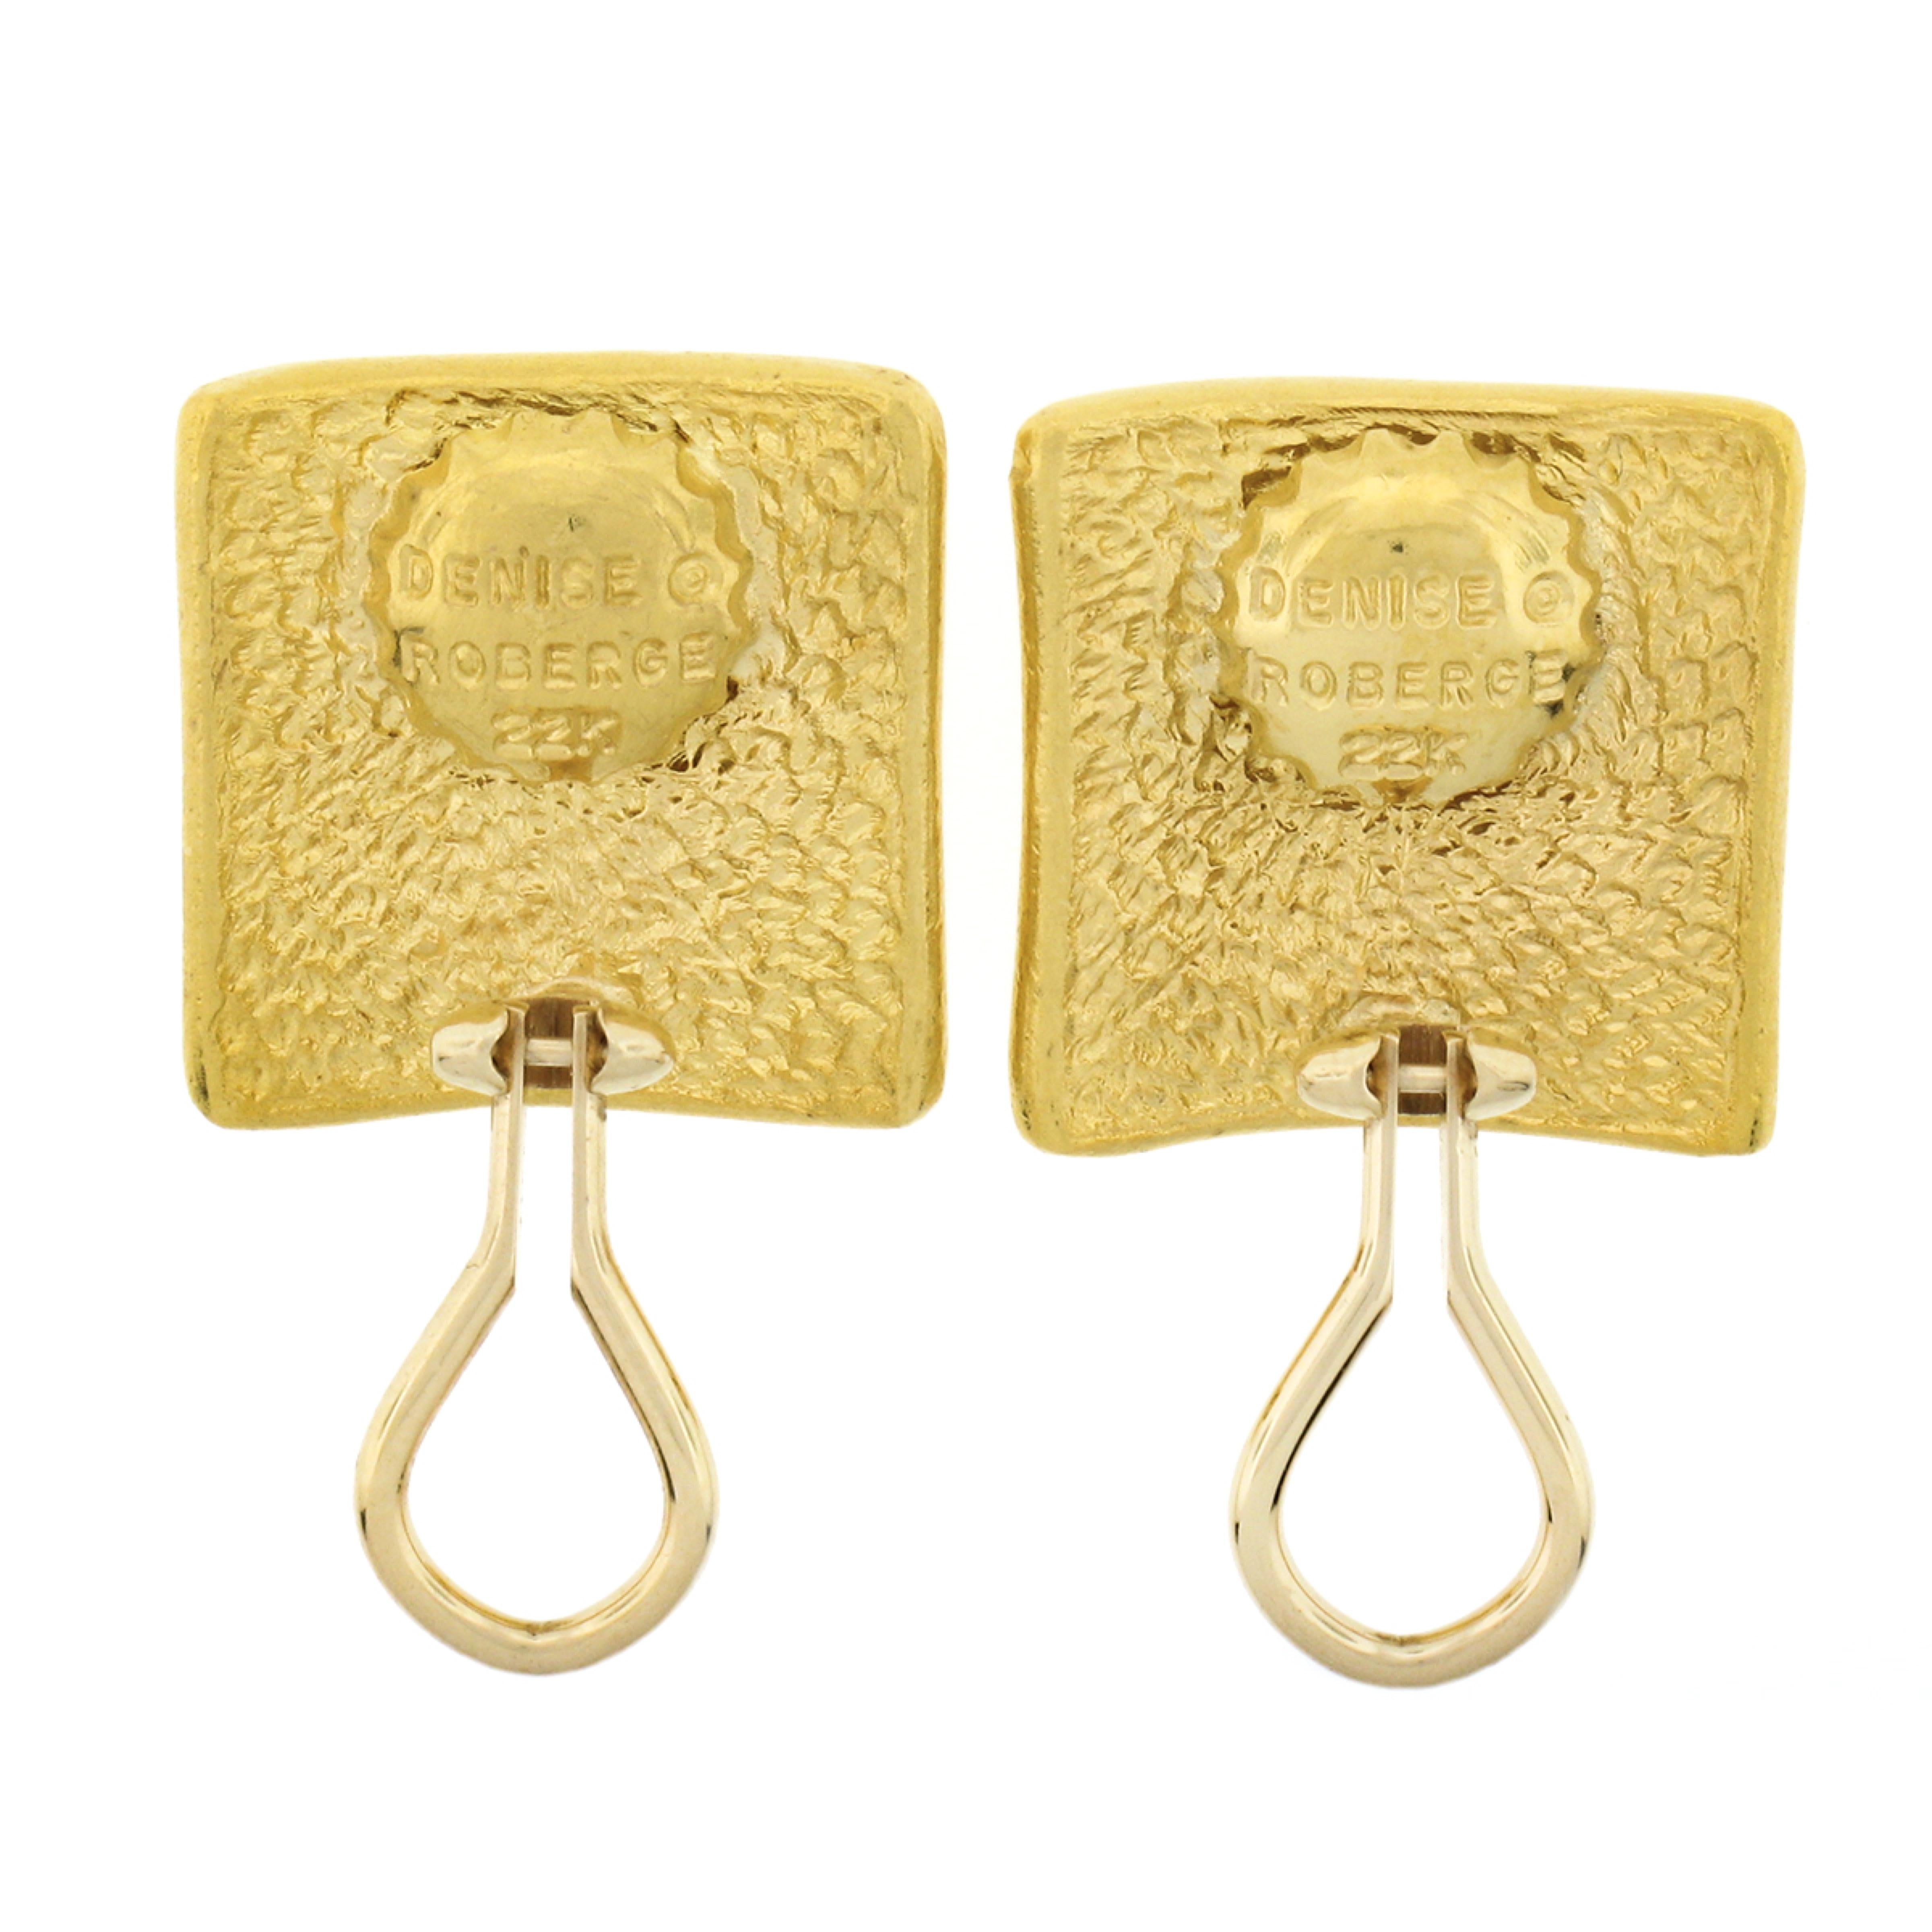 Denise Roberge 22K Gold Detailed Textured Shield Seal Squared Button Earrings 1